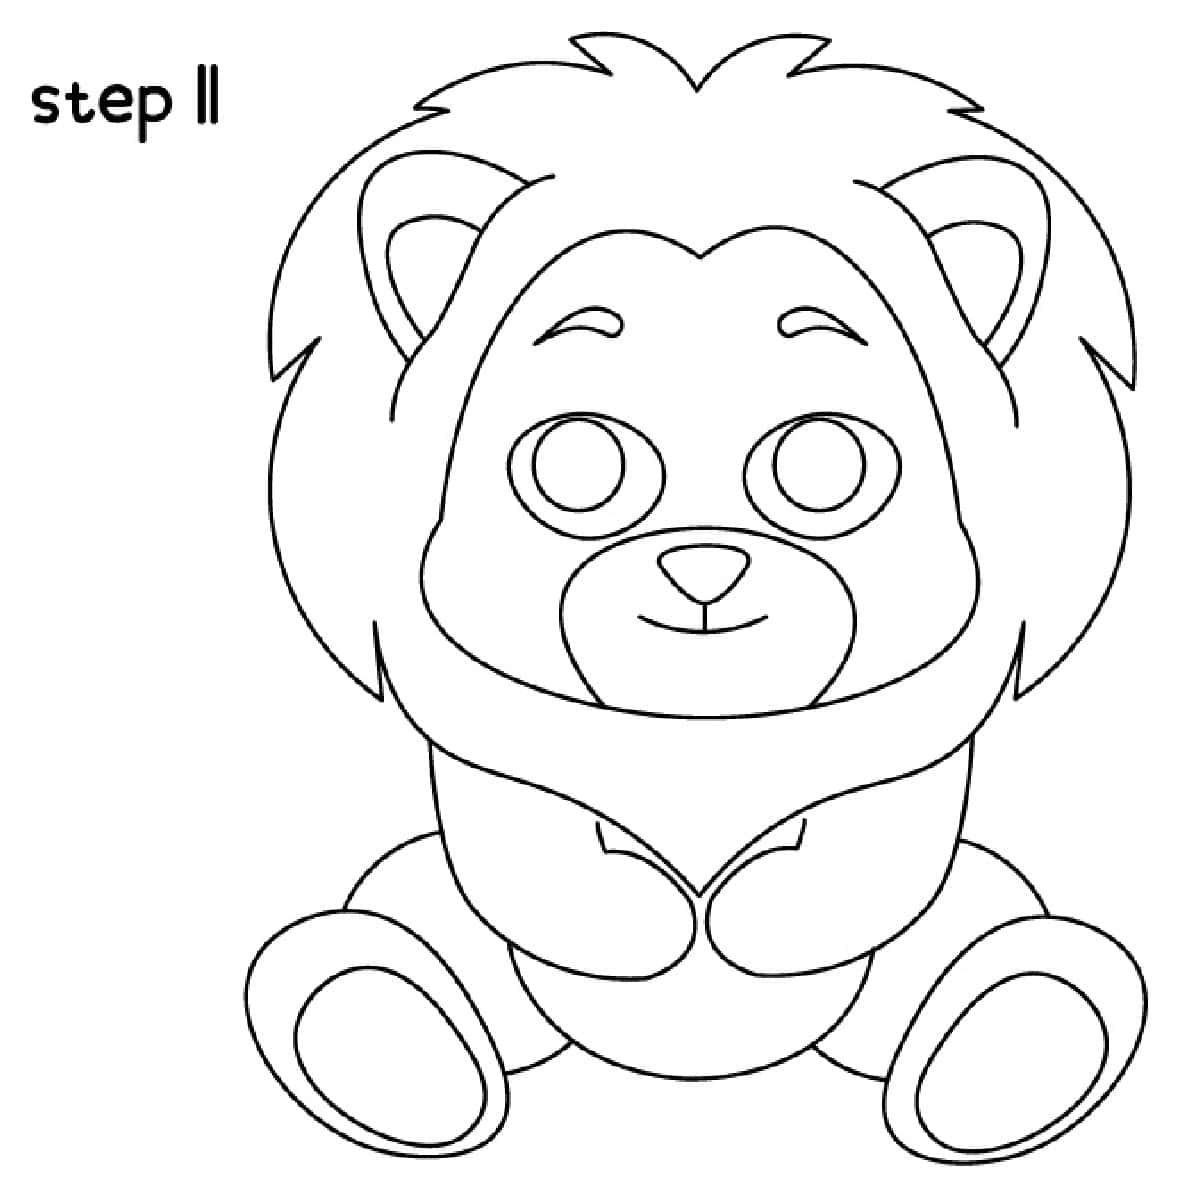 step 11 easy lion drawing